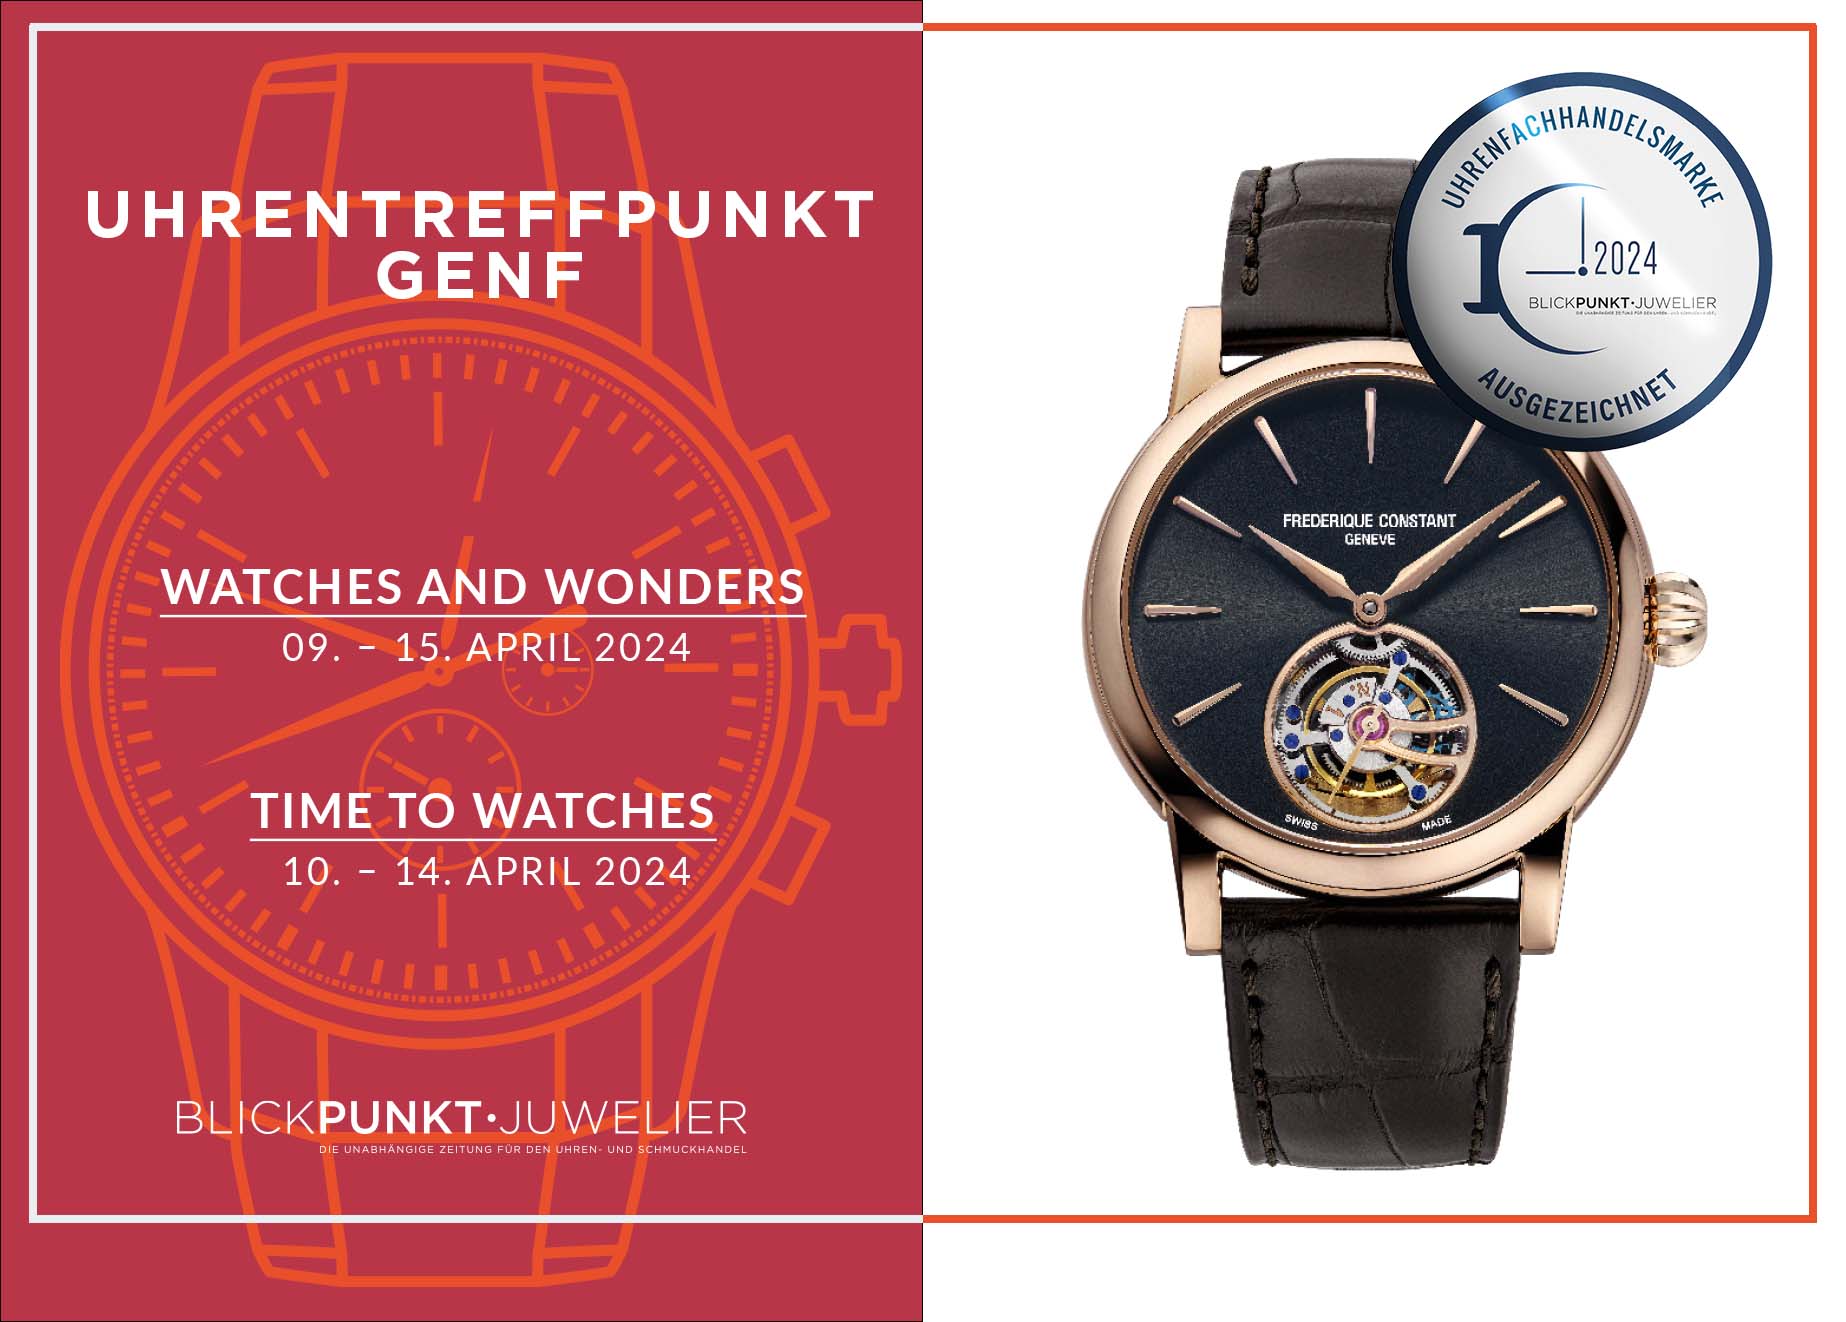 BPJ_Frederique Constant Watches and Wonders 2024